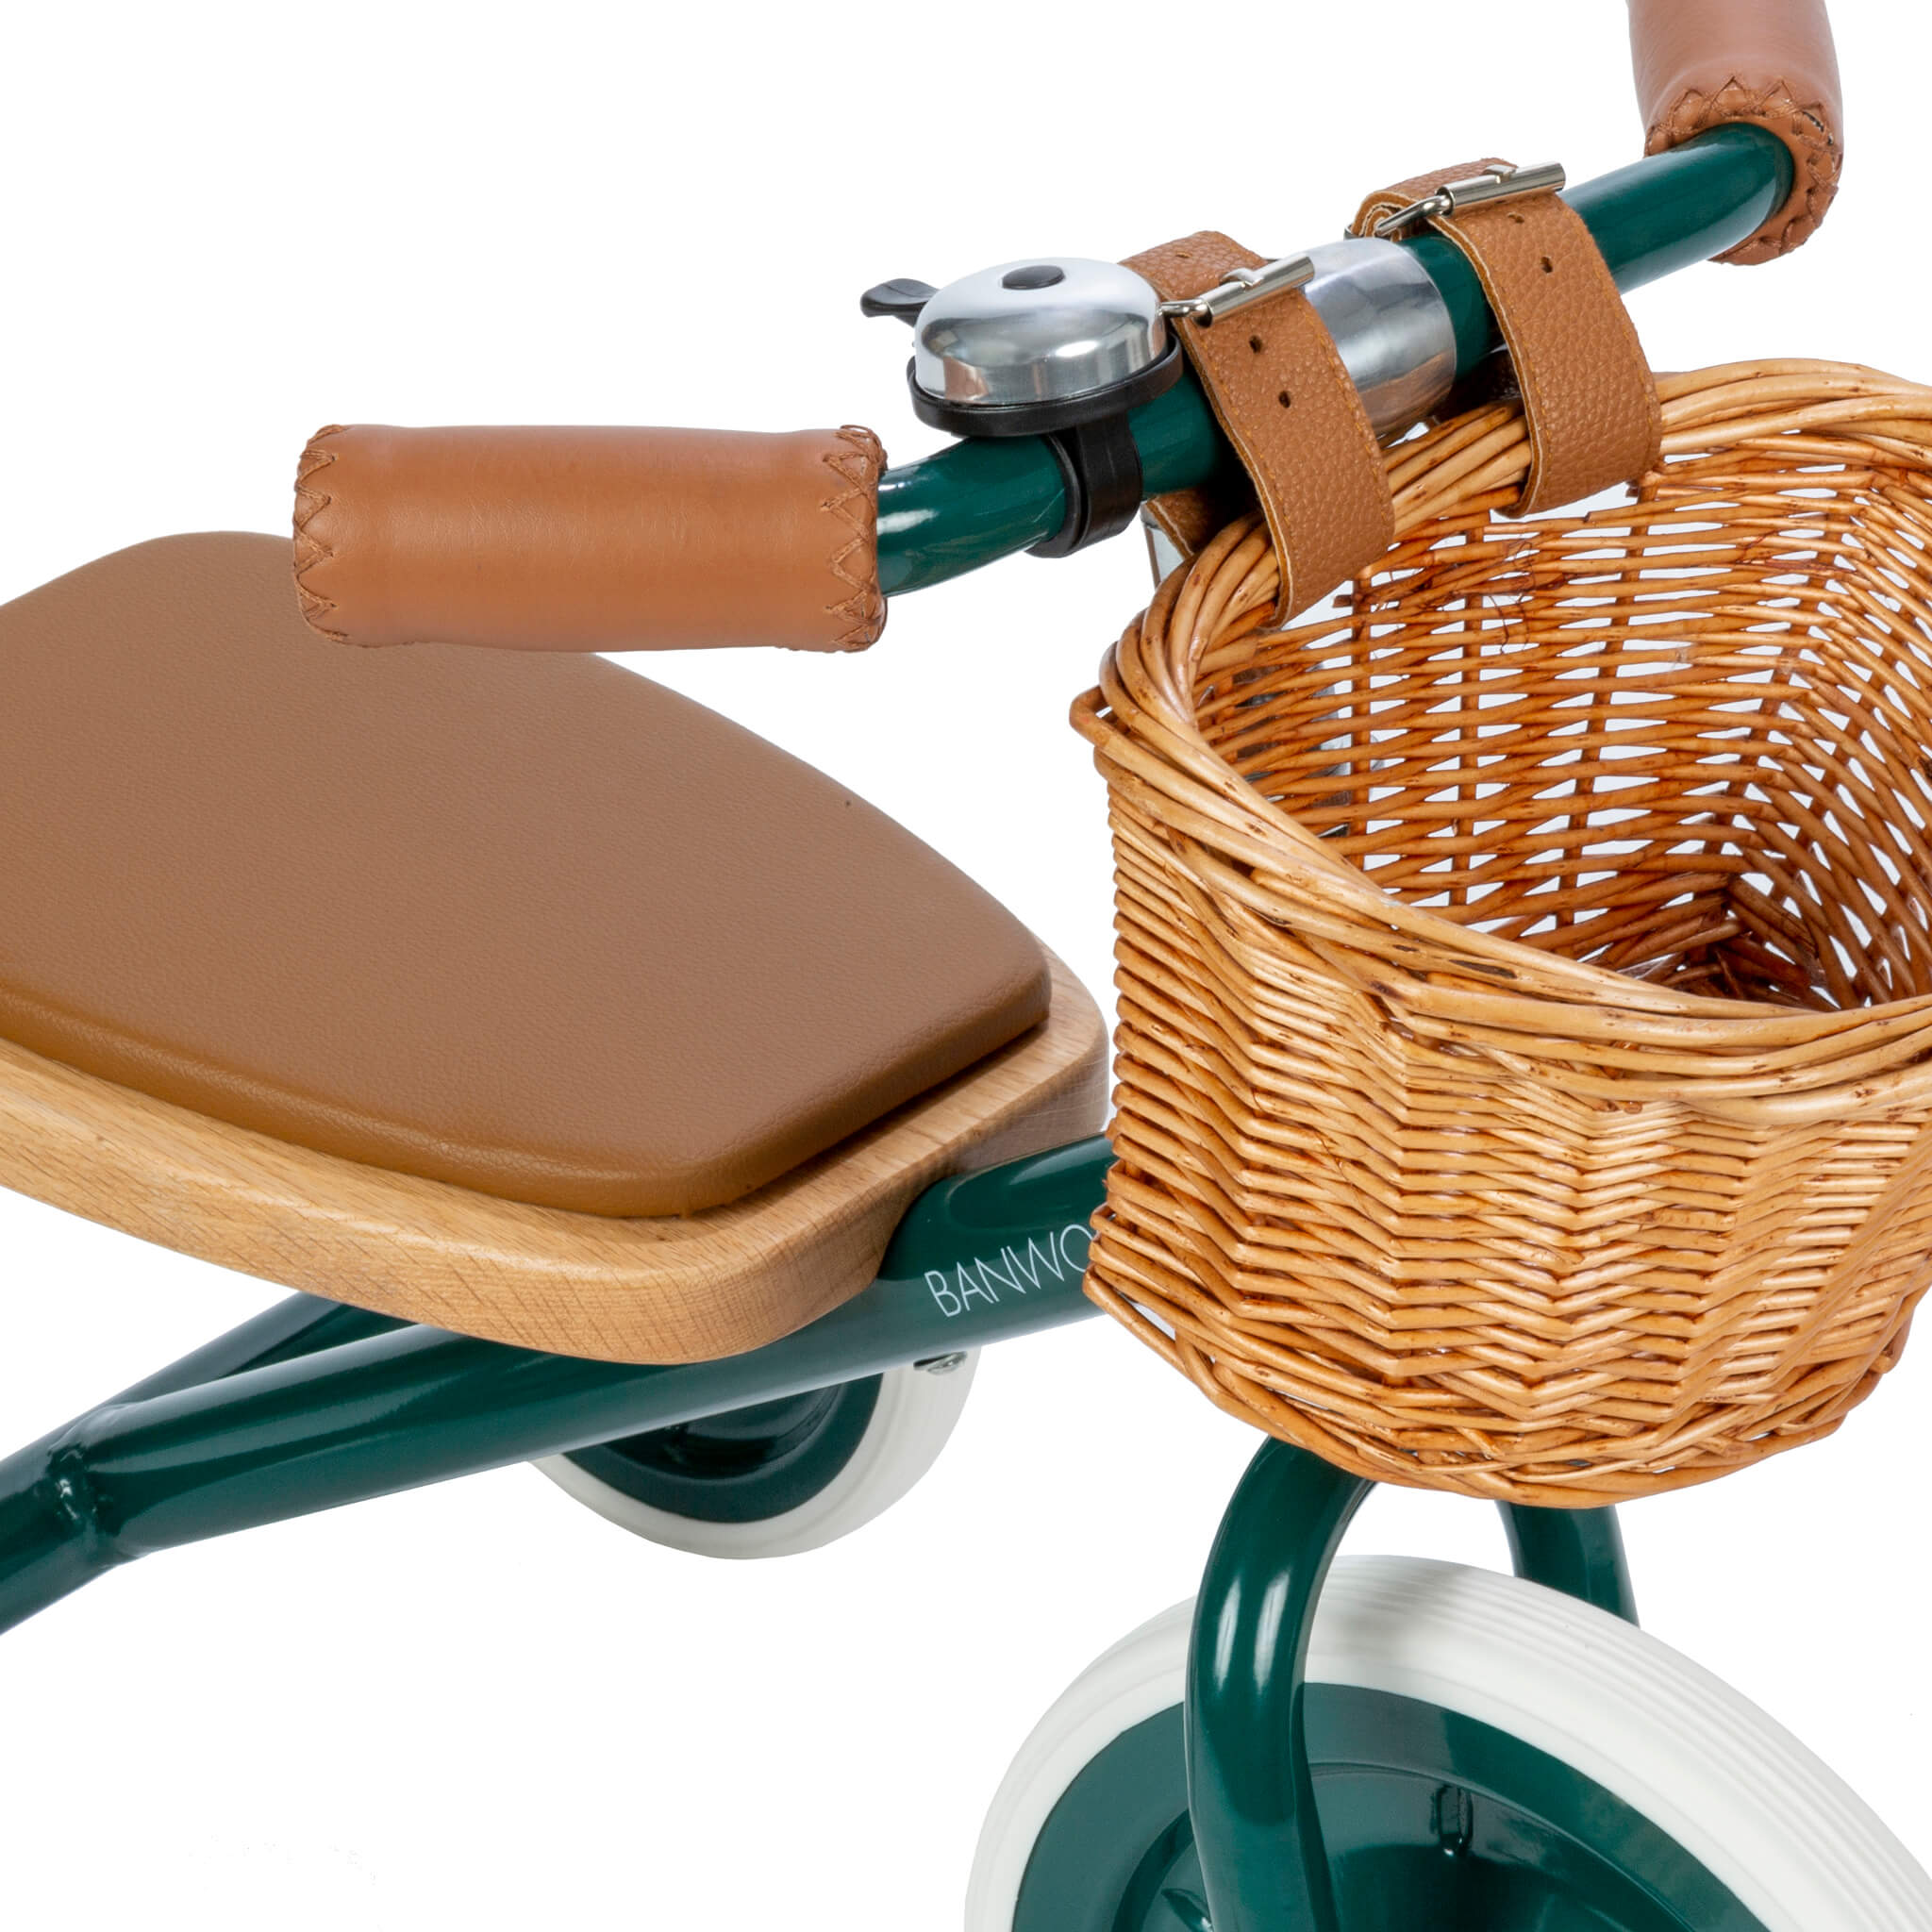 Banwood Children's Trike in Green with Basket